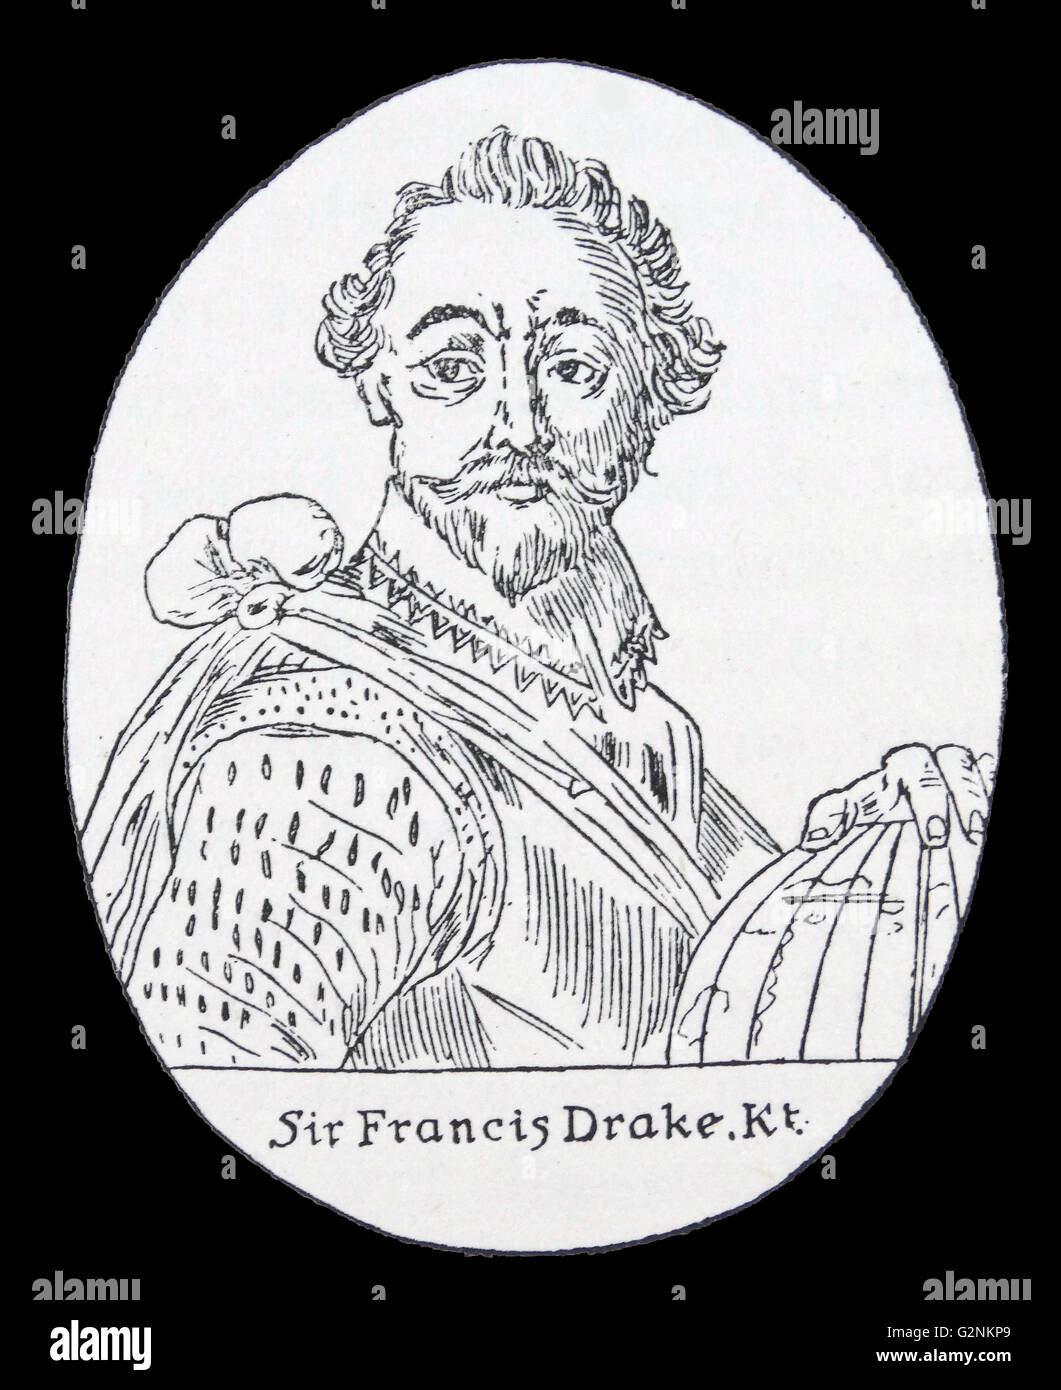 Sir Francis Drake (d. 1596), vice admiral was an English sea captain, privateer, navigator, slaver and politician of the Elizabethan era. Drake carried out the second circumnavigation of the world from 1577 to 1580. Stock Photo